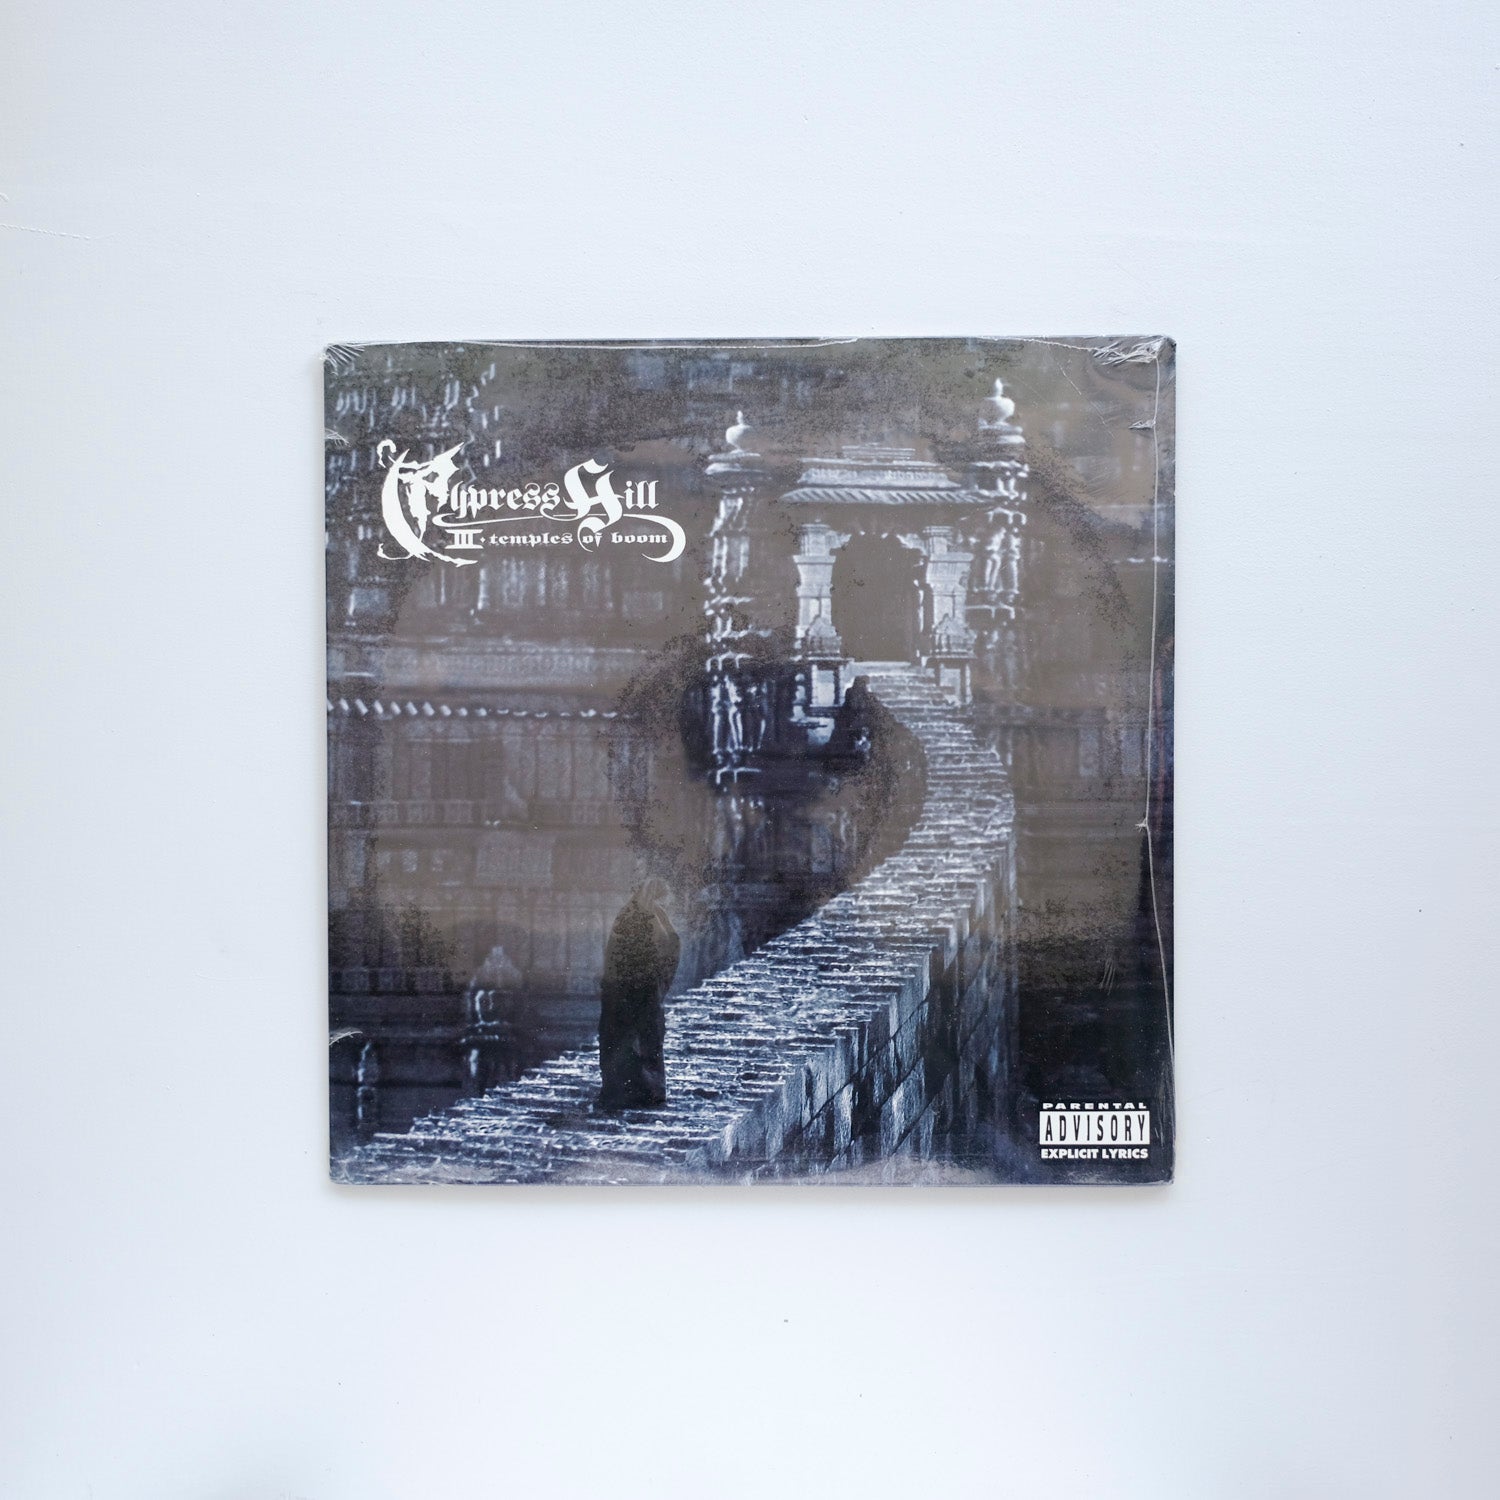 Cypress Hill - III - Temples Of Boom [sealed]